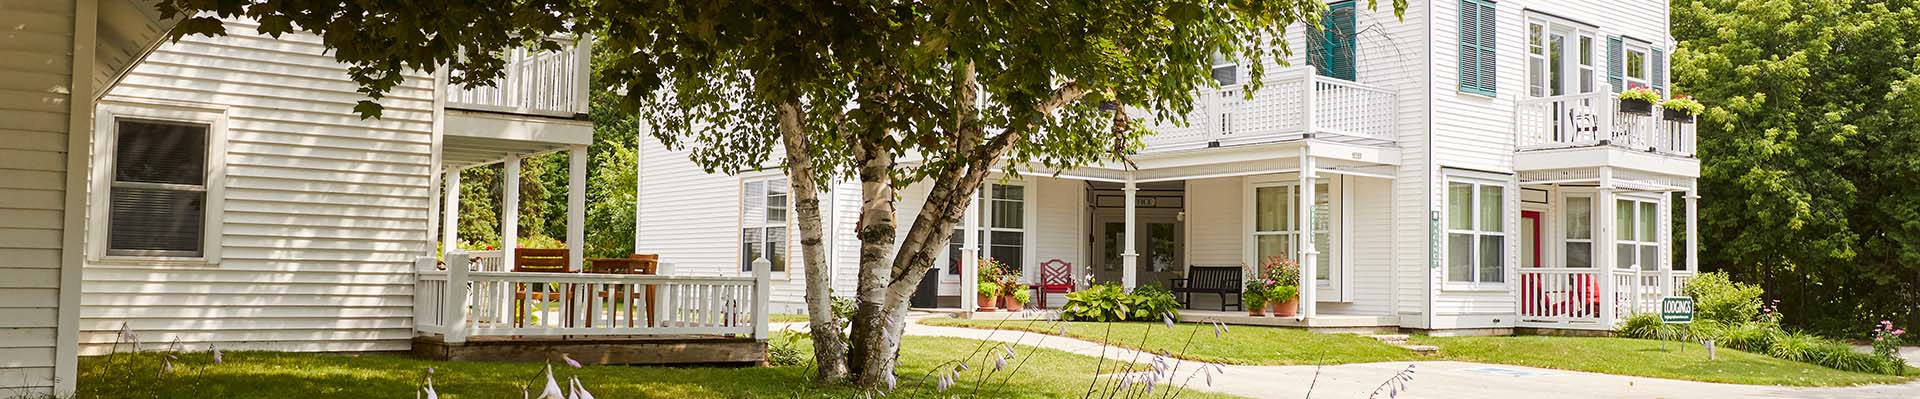 A quaint, old-fashioned inn with wide driveways and open porches.